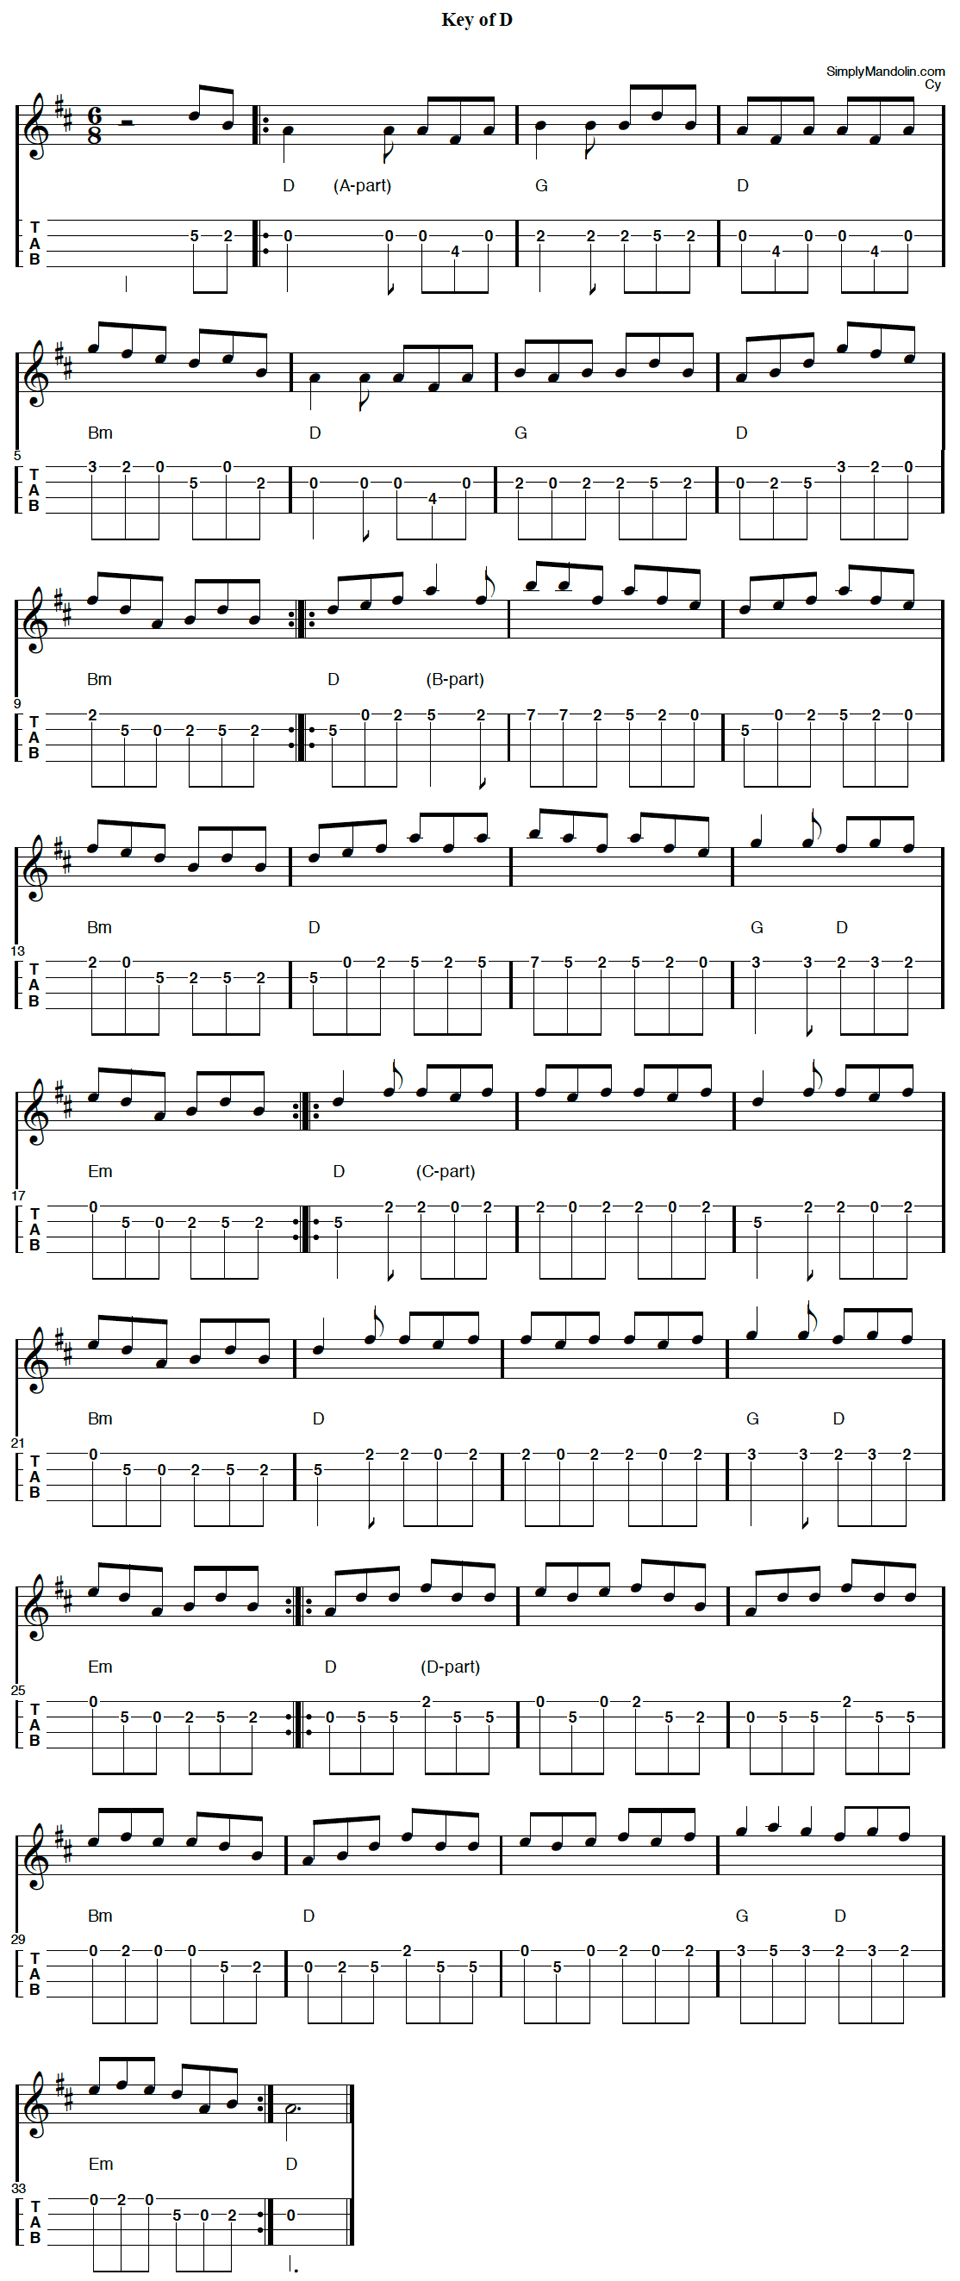 image of tablature for the irish tune lark in the morning